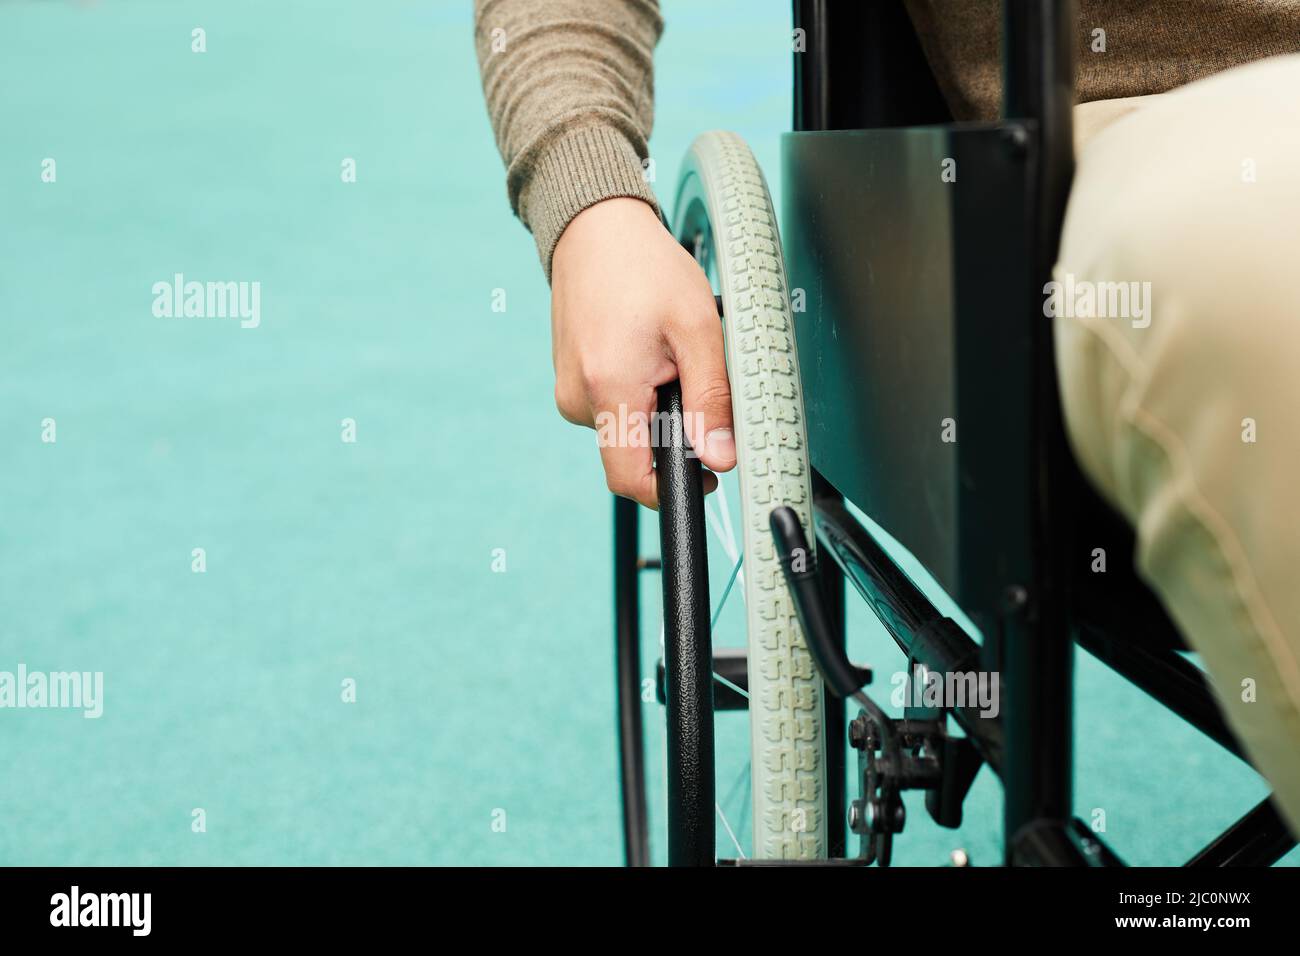 Close-up of unrecognizable handicapped man pushing hand rim of wheelchair while moving outdoors Stock Photo